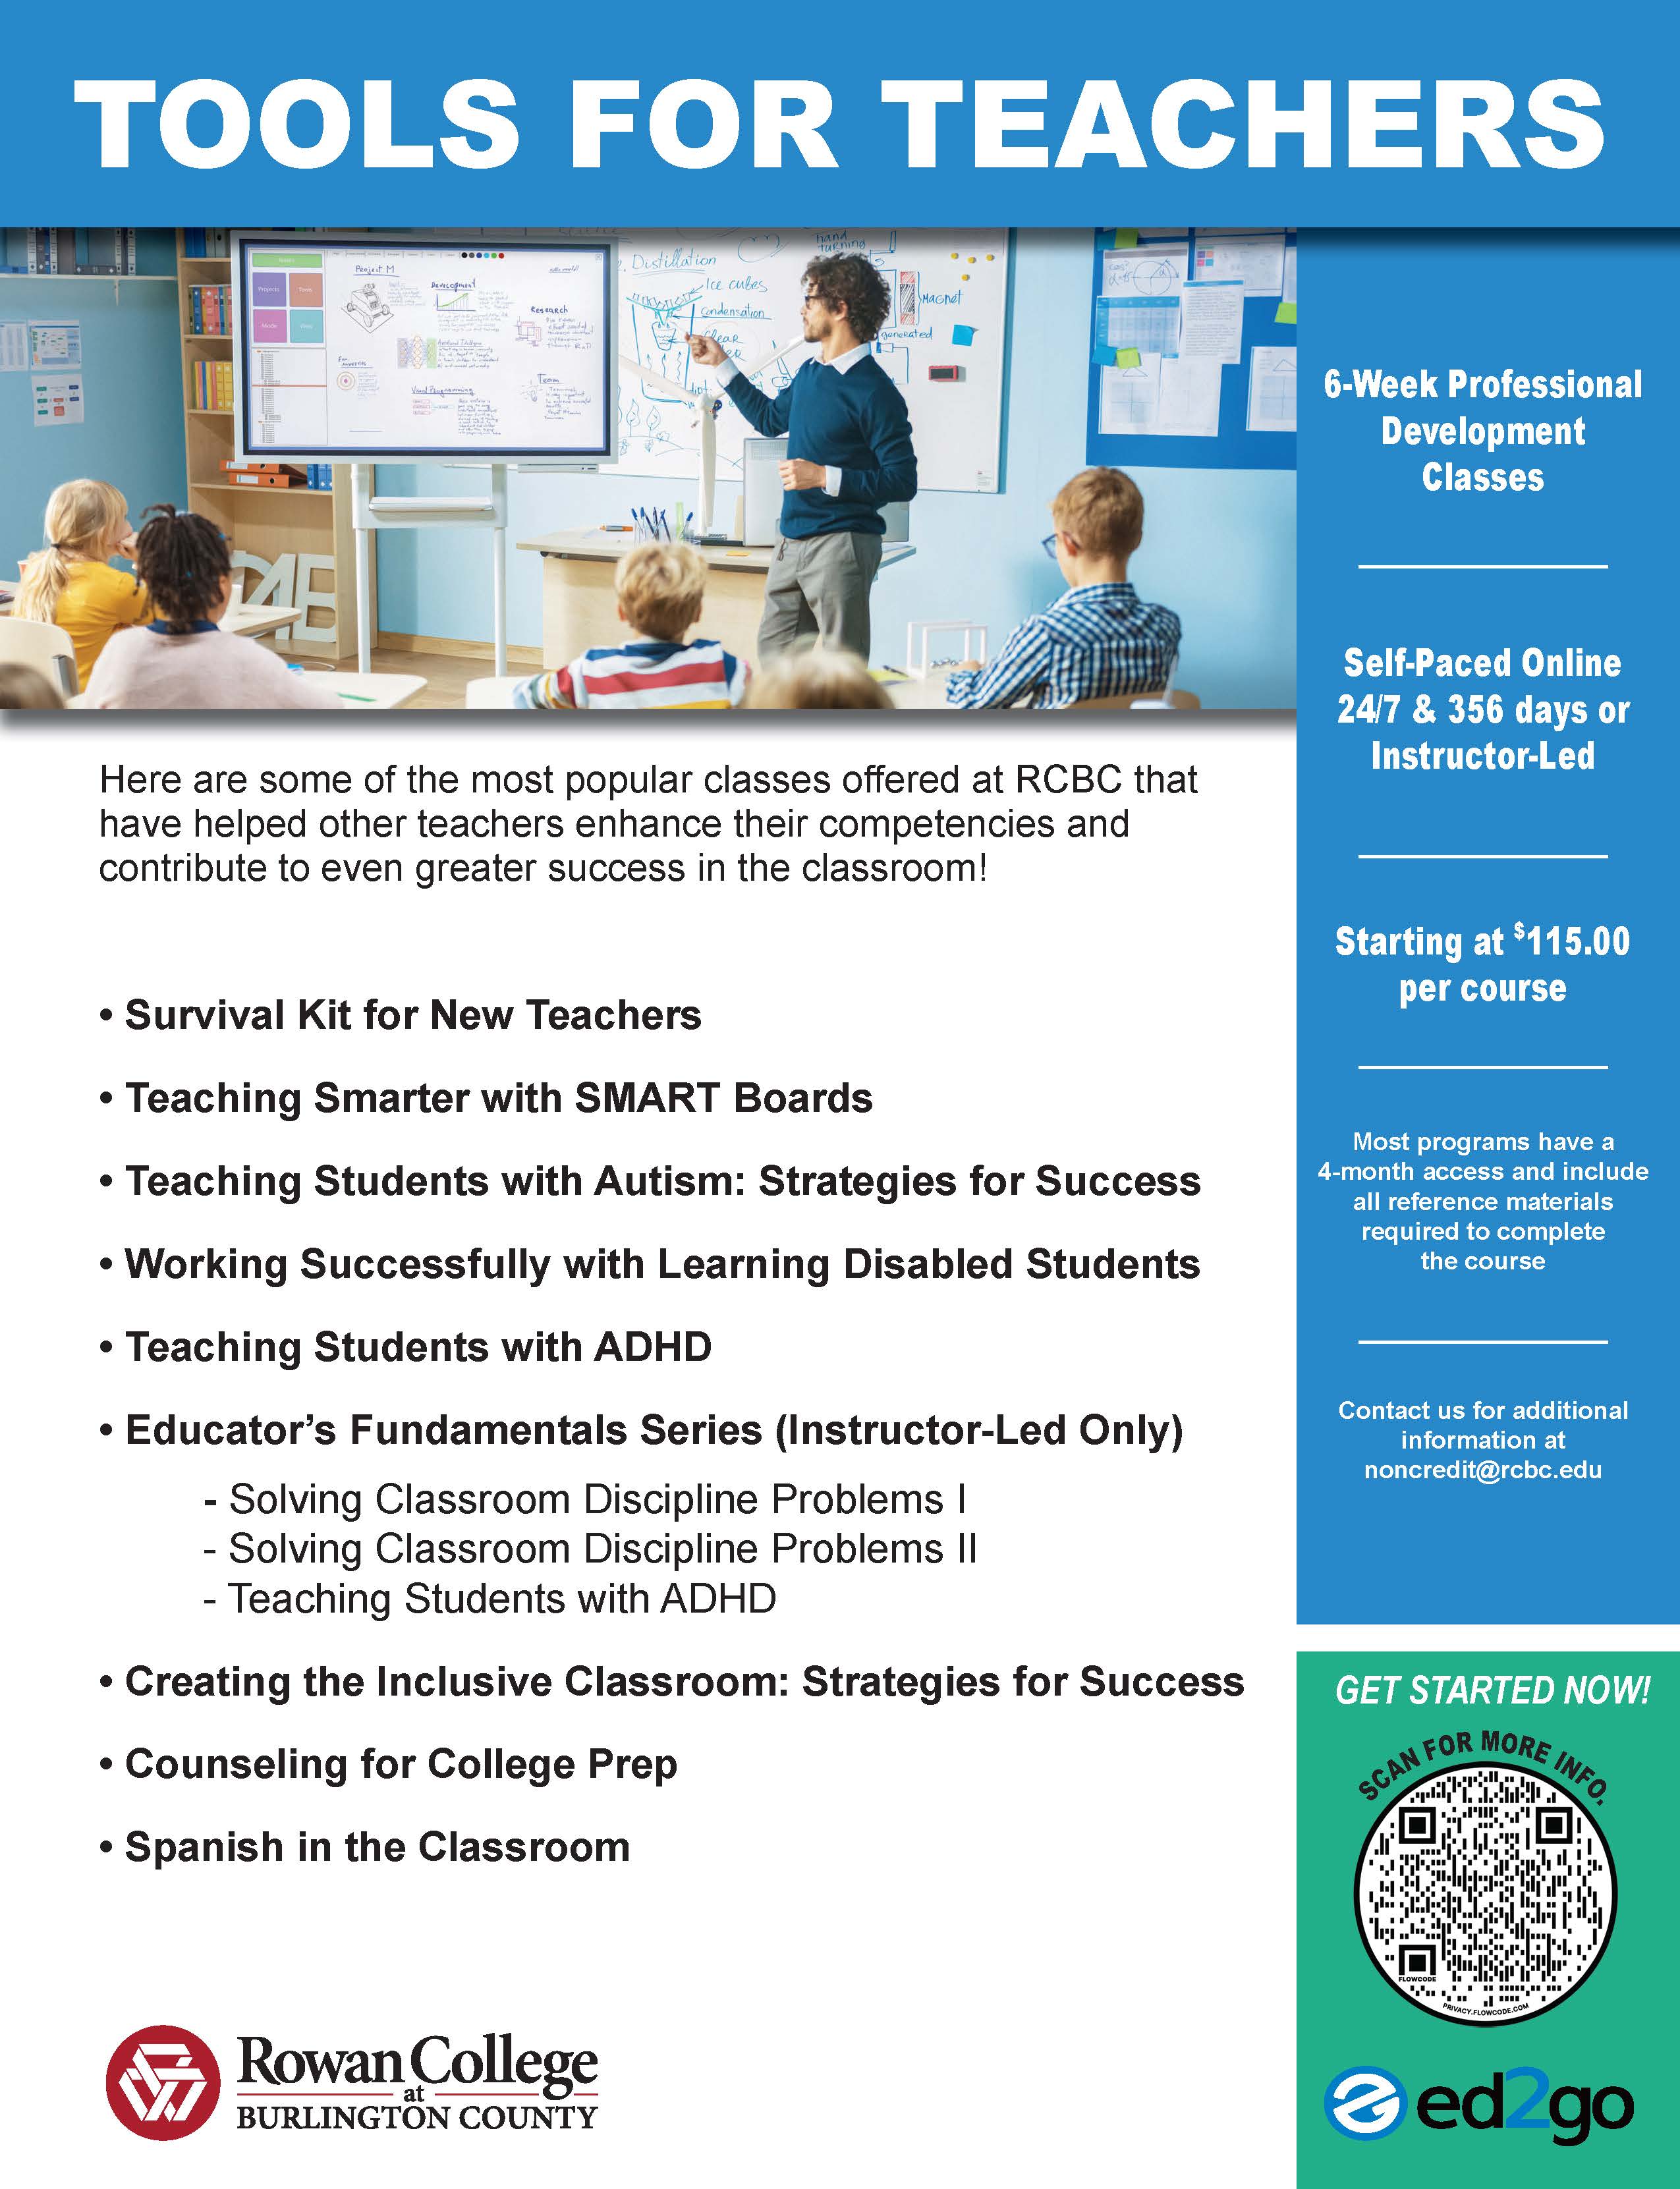 Tools For Teachers educational flyer promoting Workforce Development educational course offerings